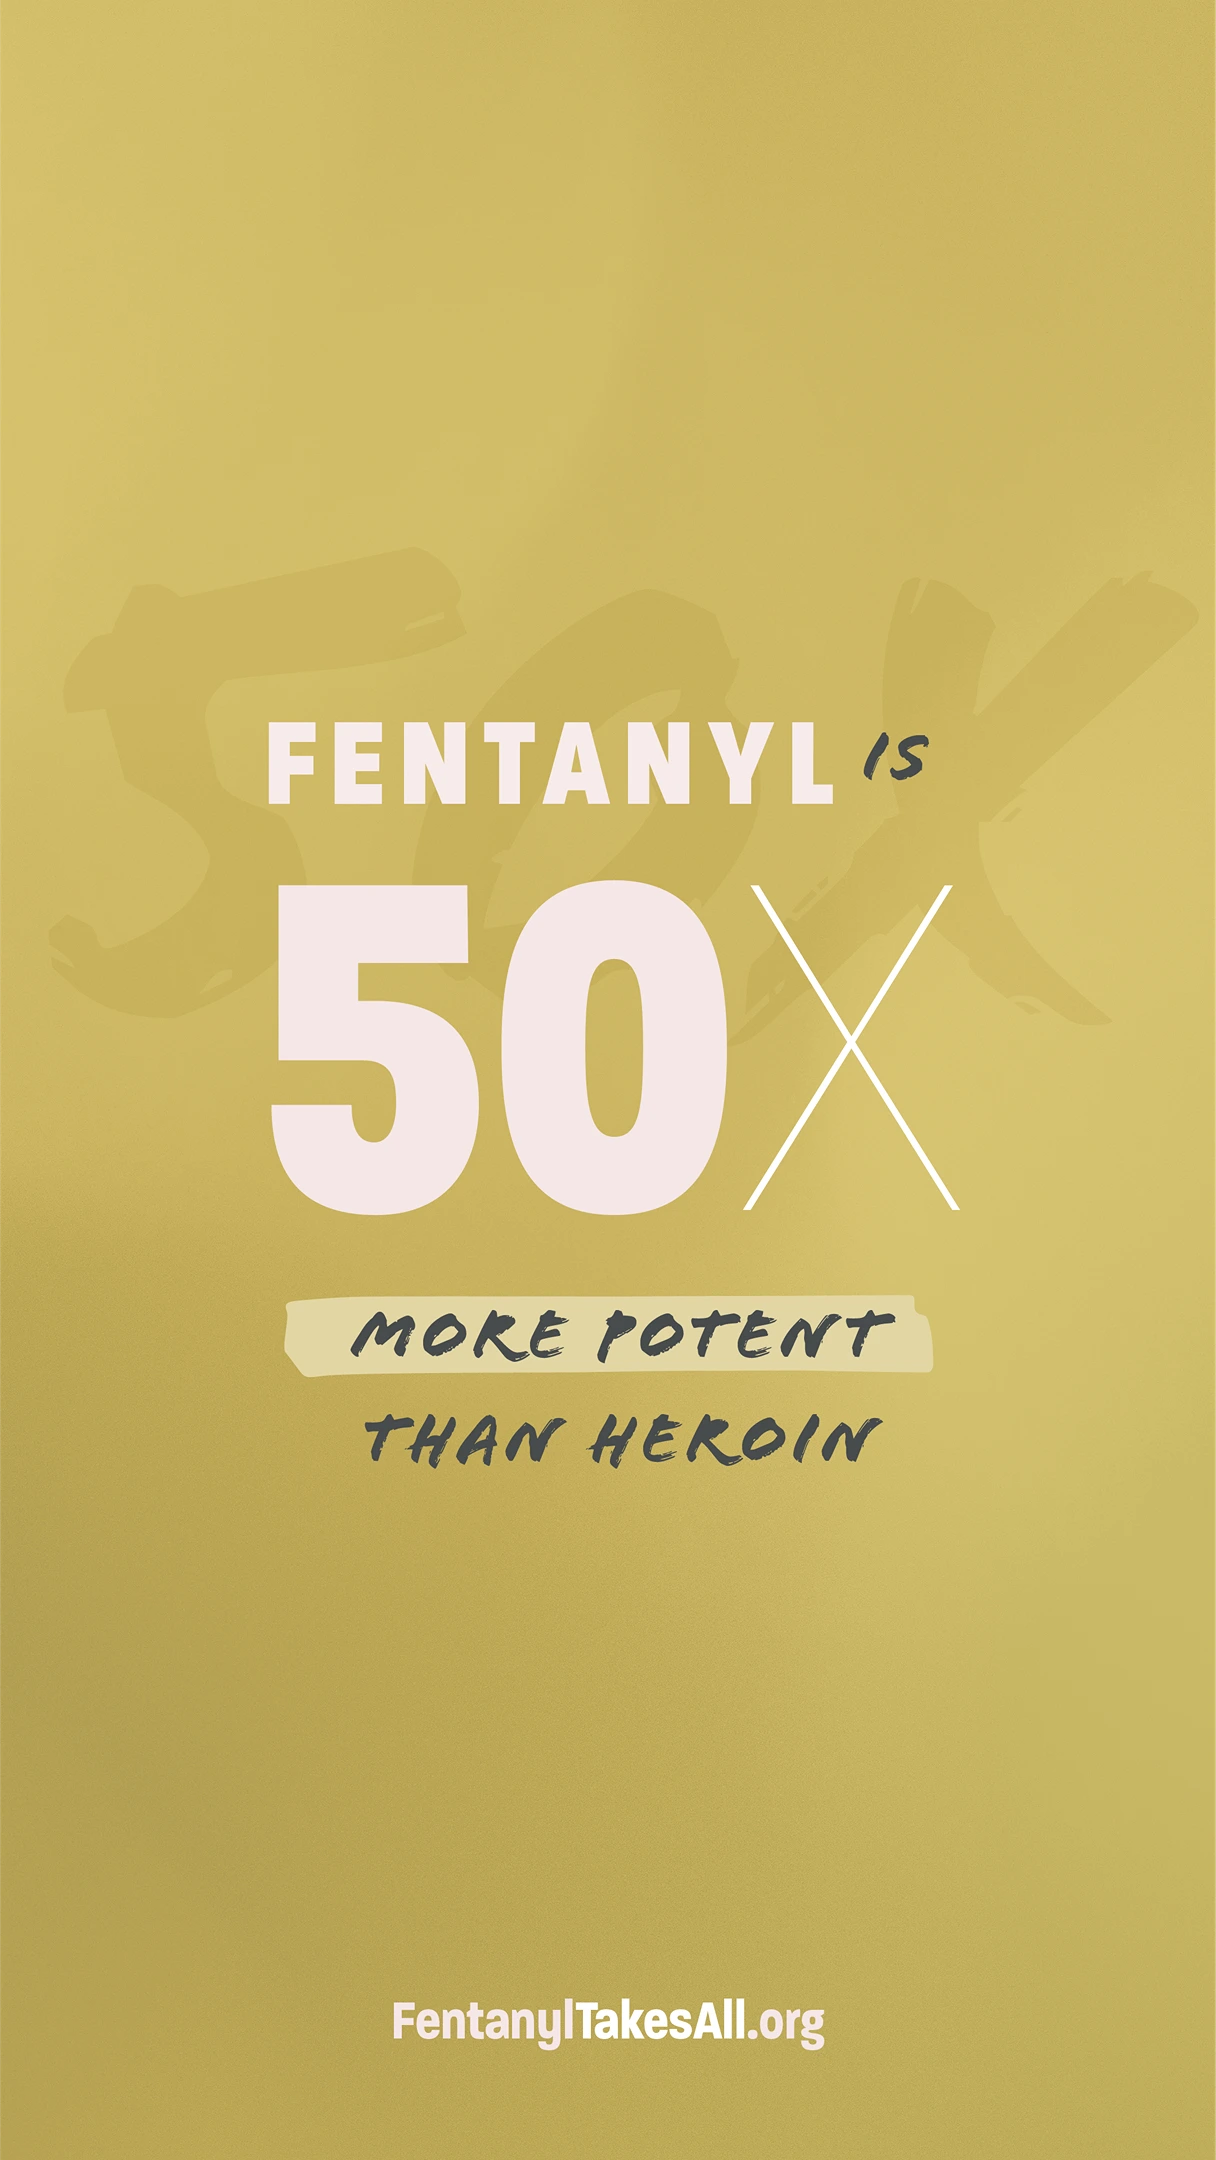 fentanyl is 50 times more potent than heroin.